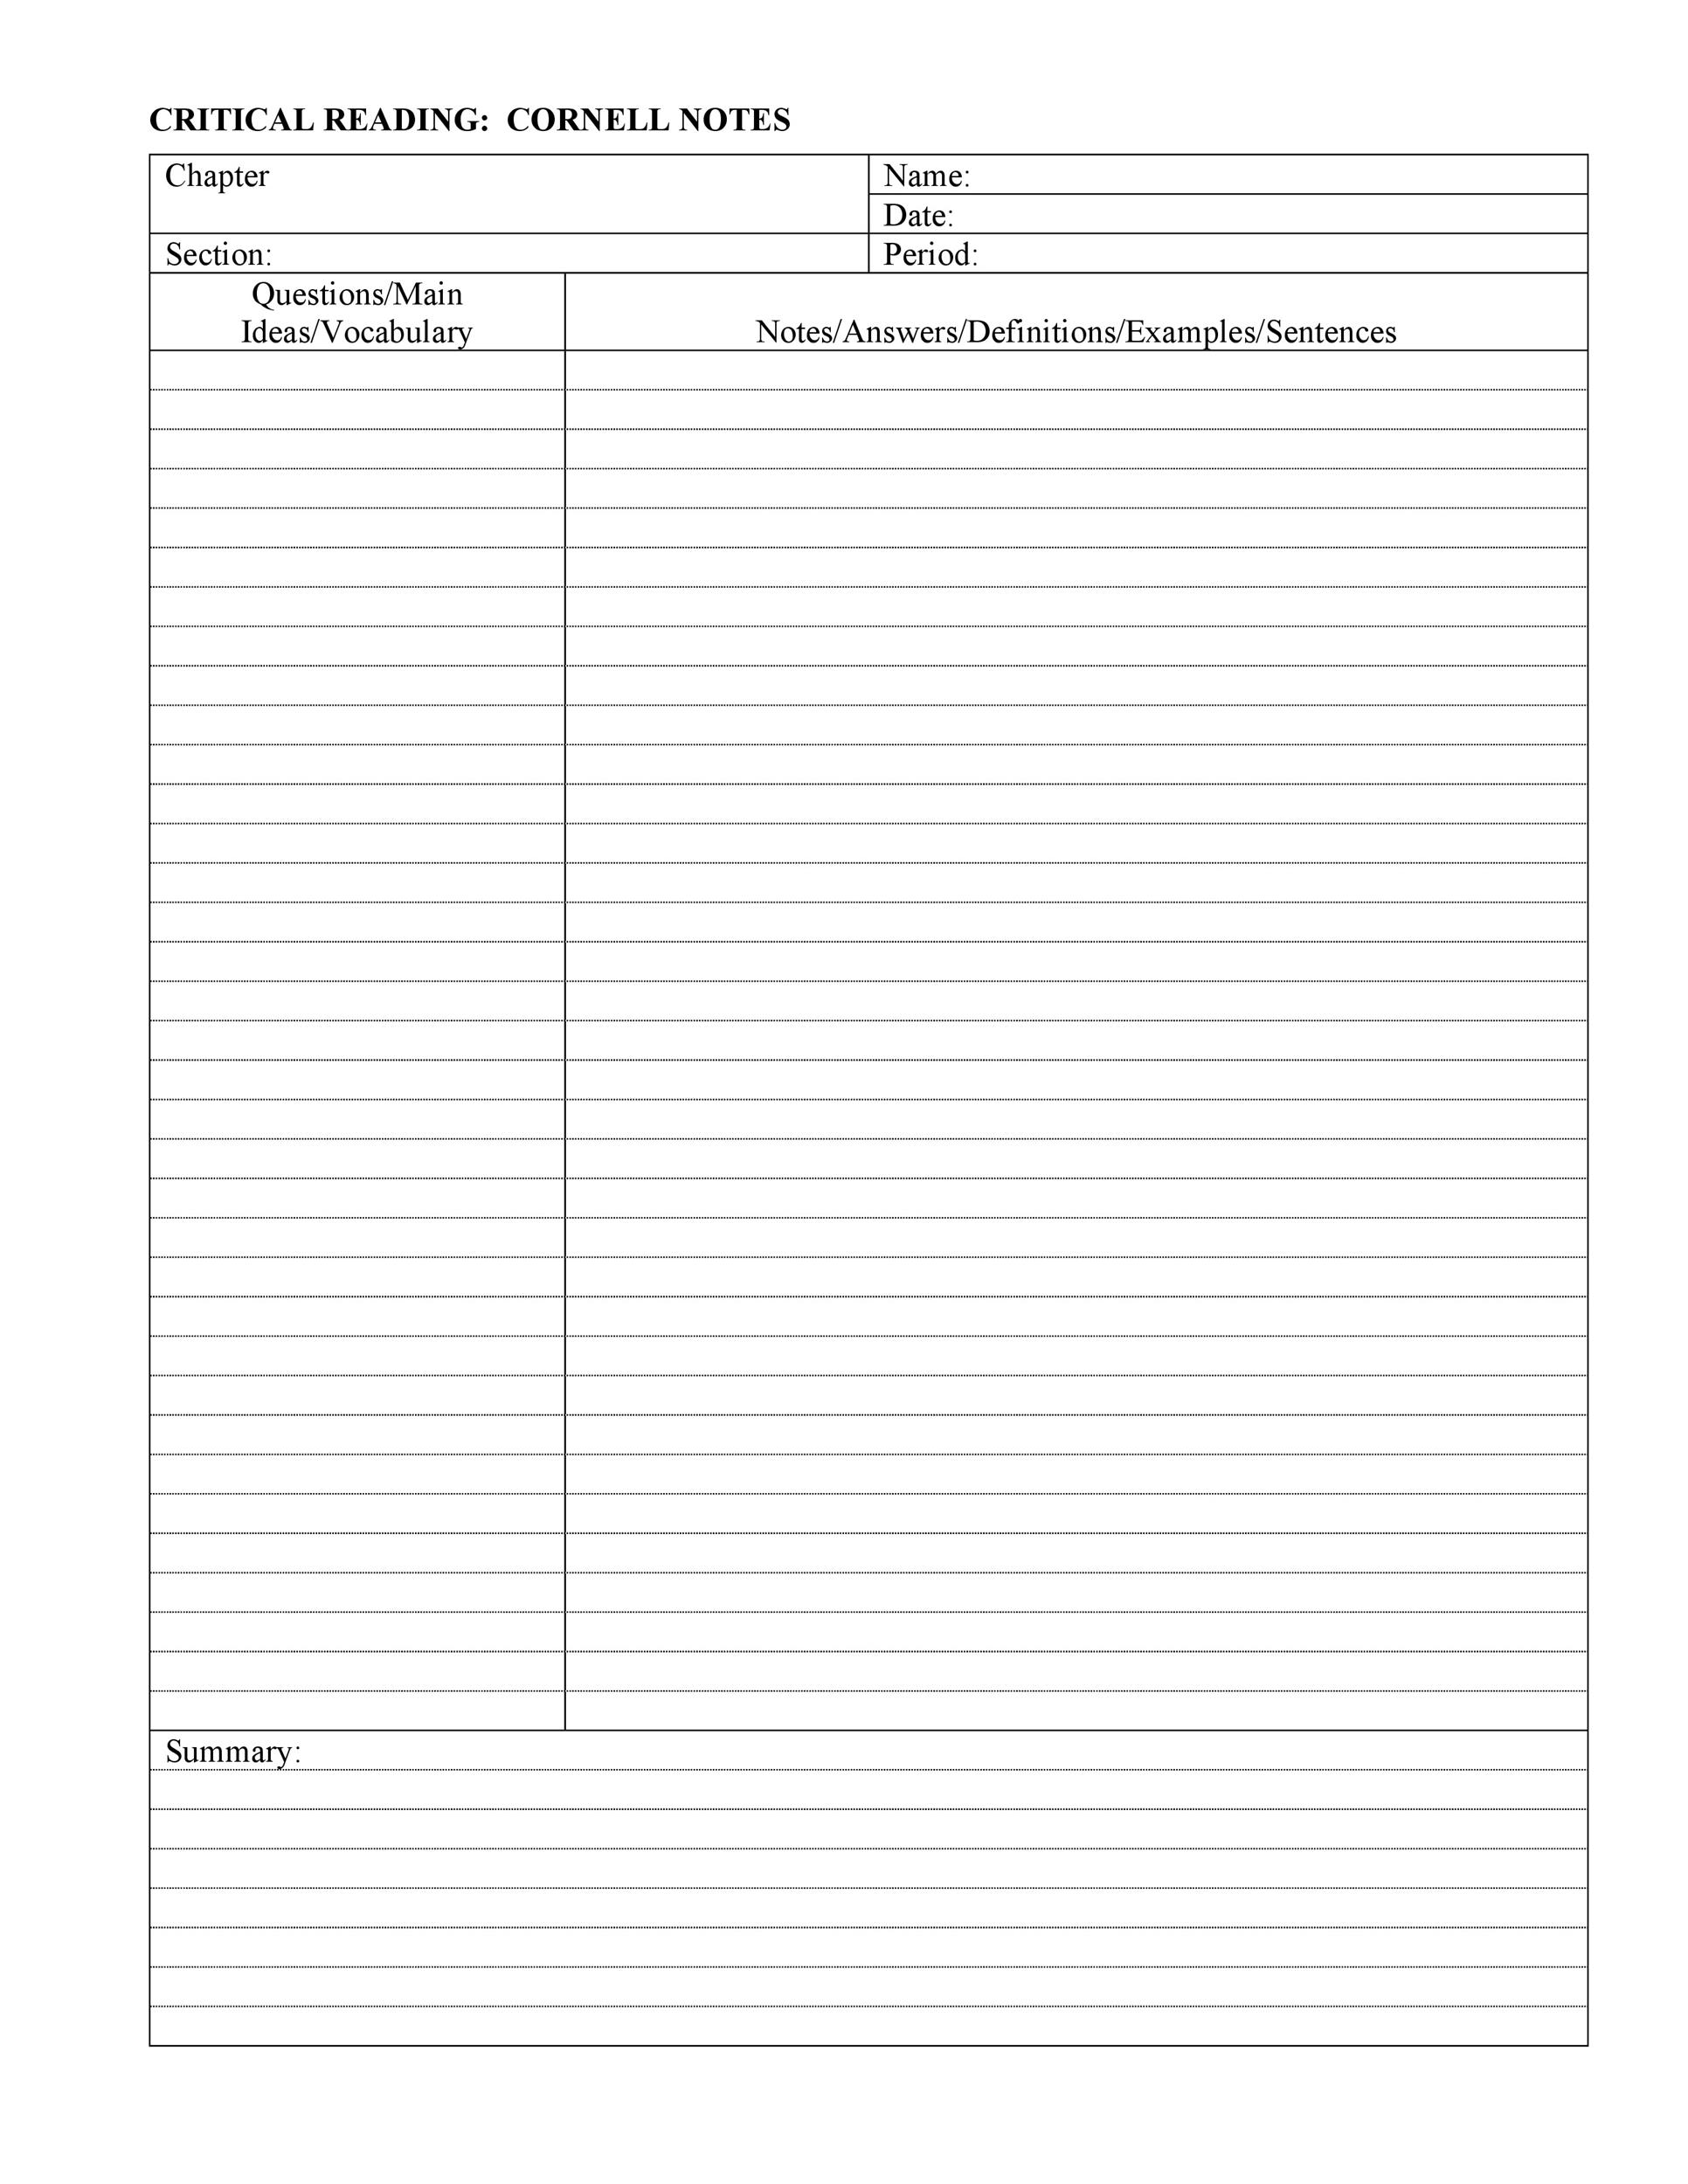 37 Cornell Notes Templates Examples Word Excel Pdf ᐅ